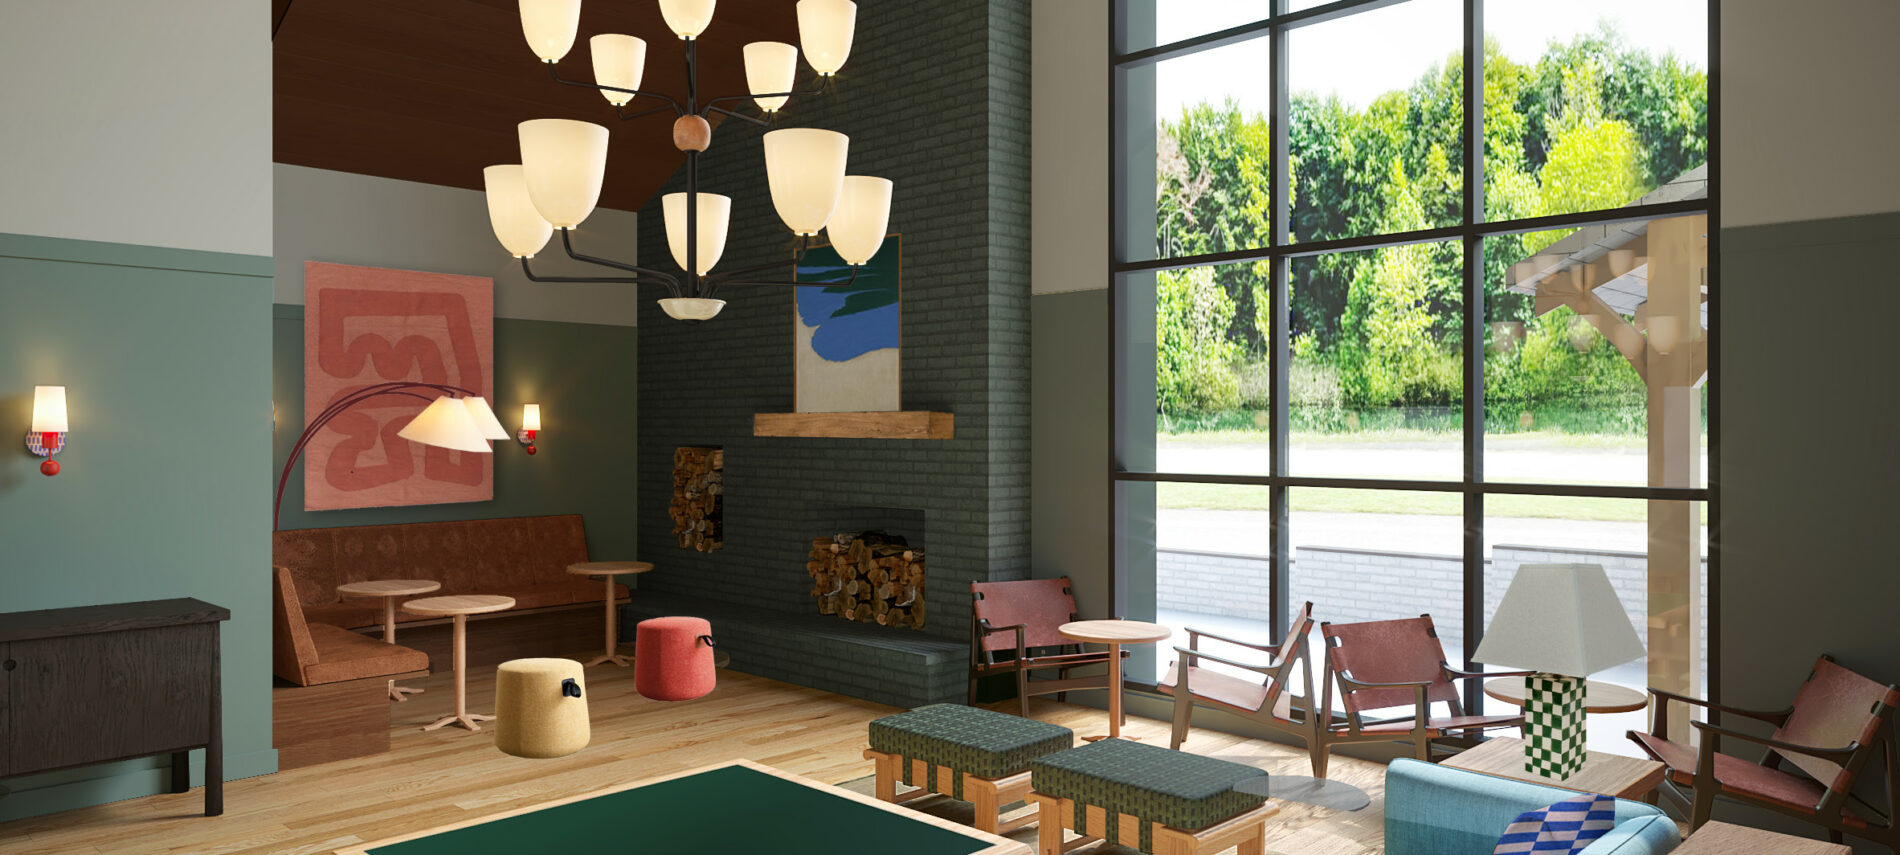 Image of the Lobby at Outbound Stowe with a fireplace, chairs and a center chandelier.